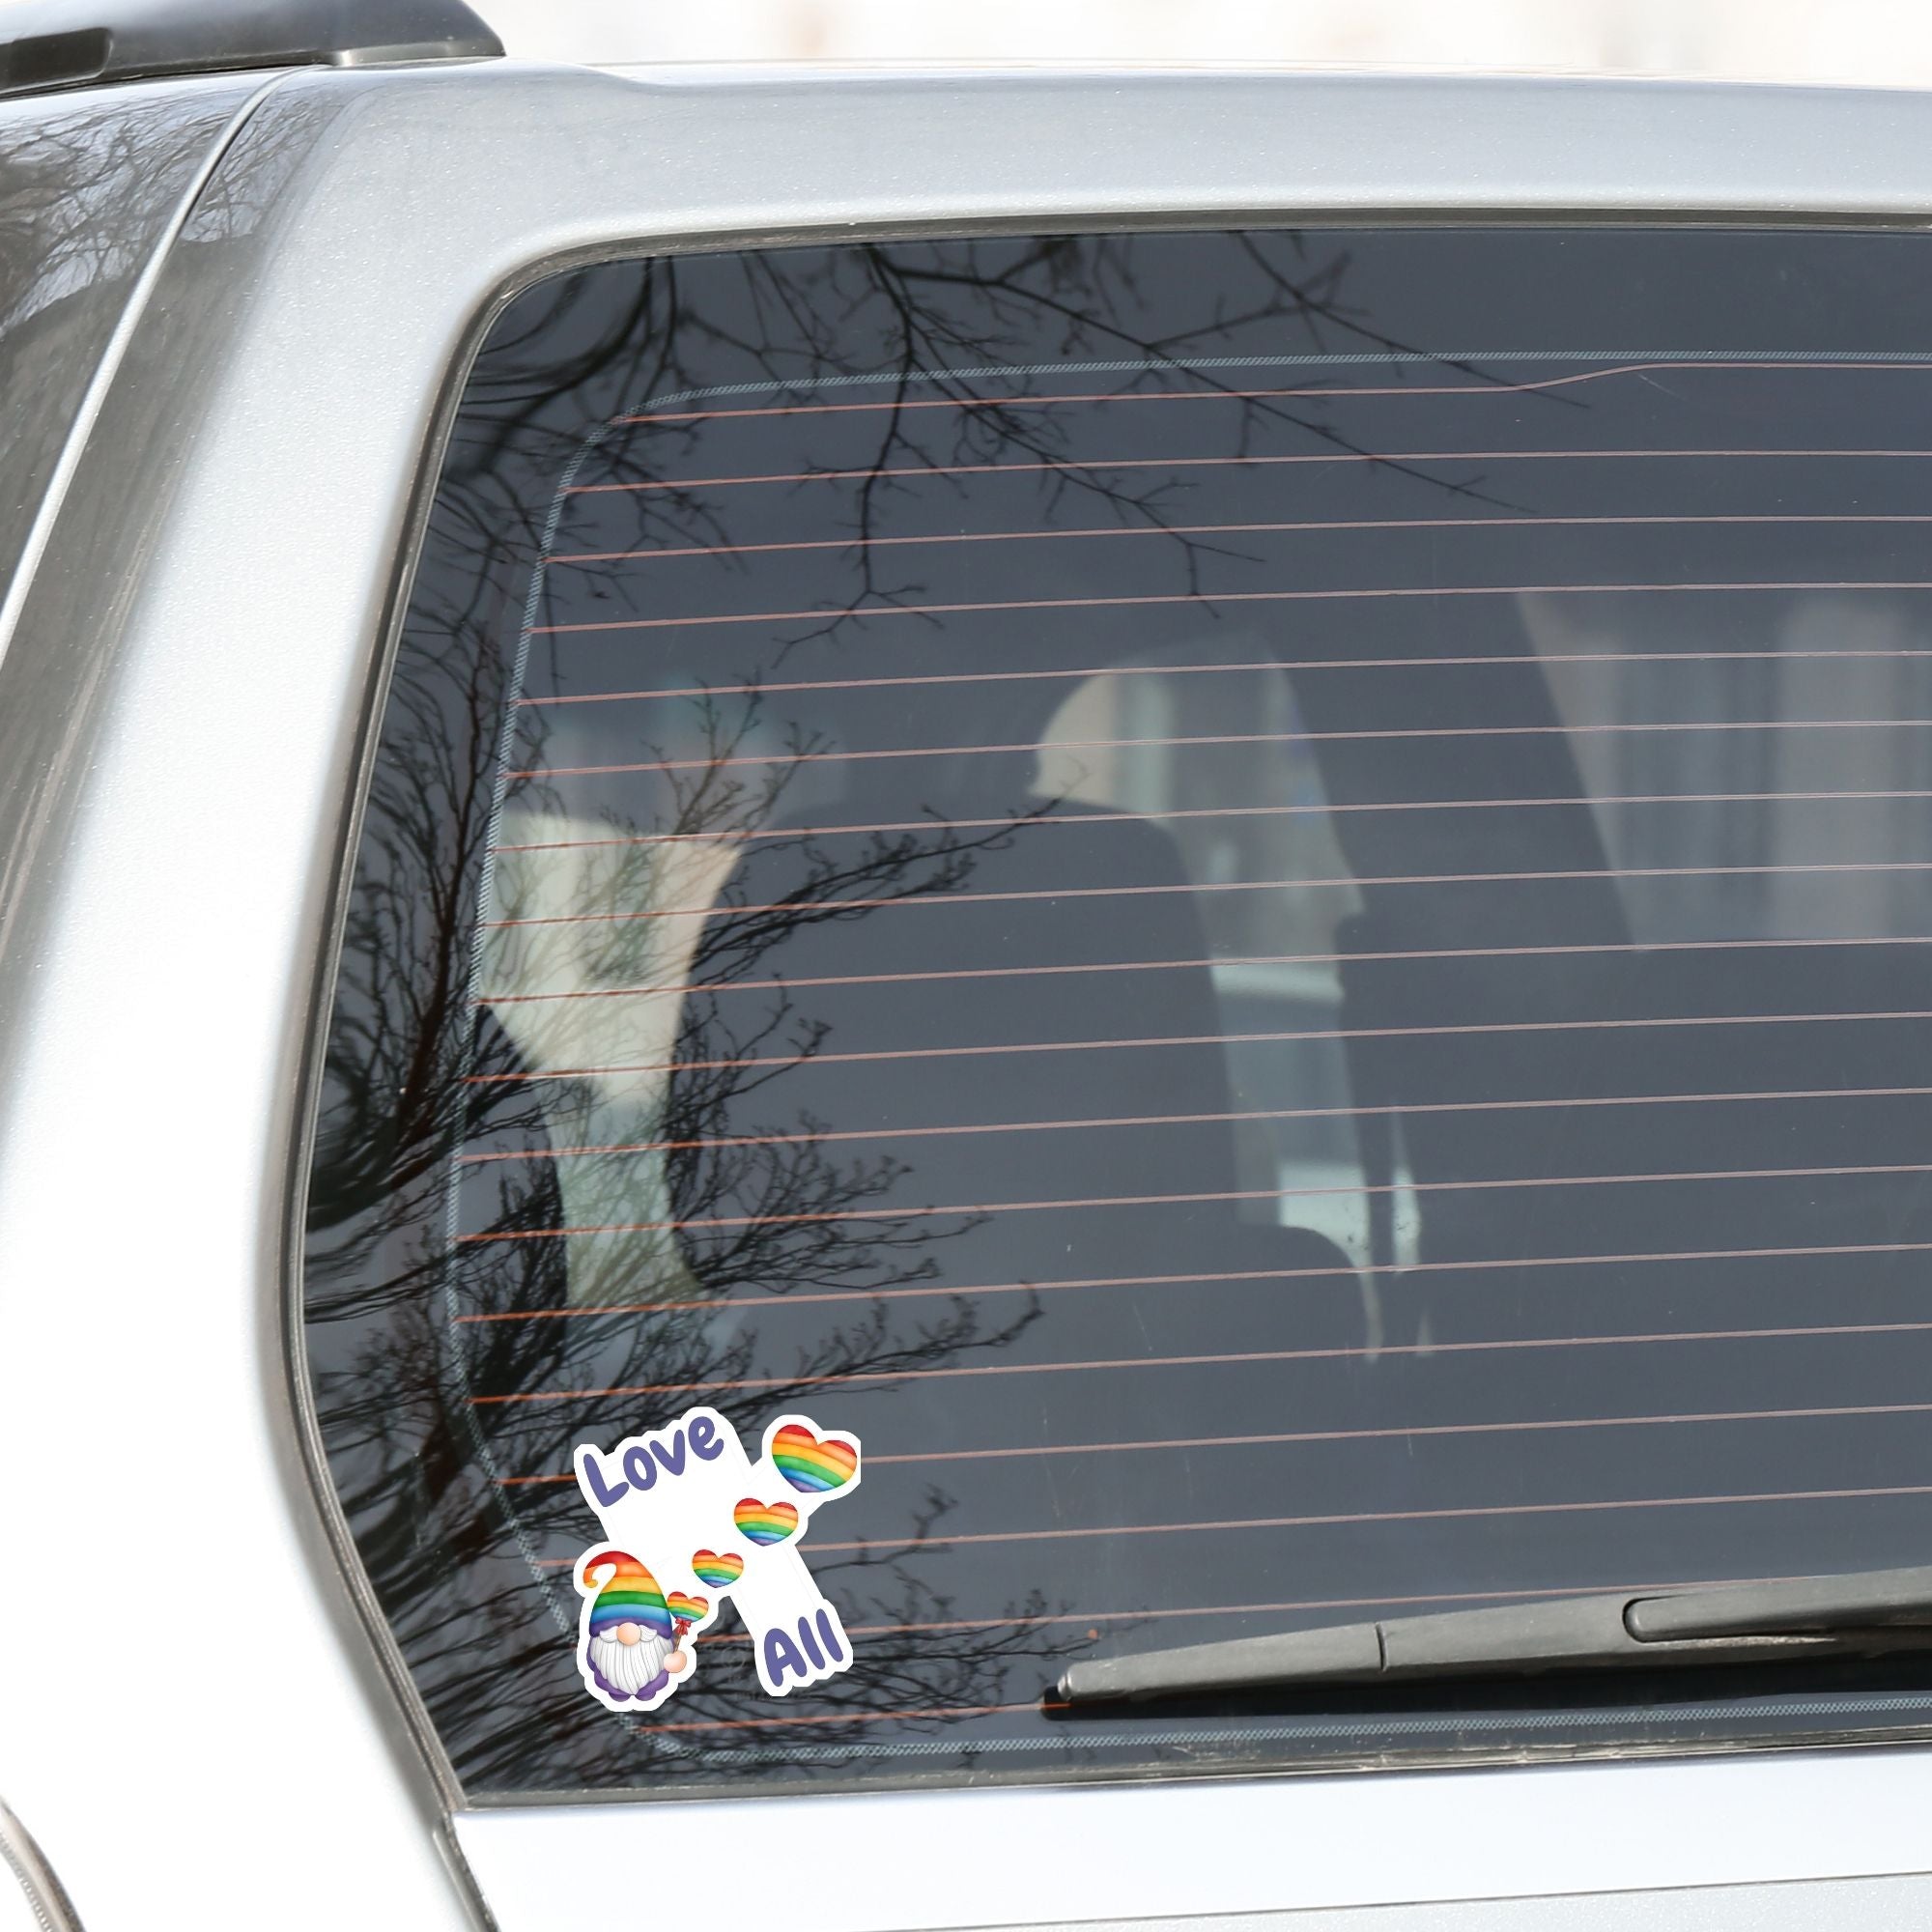 This gnome is showing his Pride! With the words "Love All", this individual die-cut sticker features a gnome with a rainbow hat and rainbow heart balloons. This image shows the Gnome Love All die-cut sticker on the back window of a car.